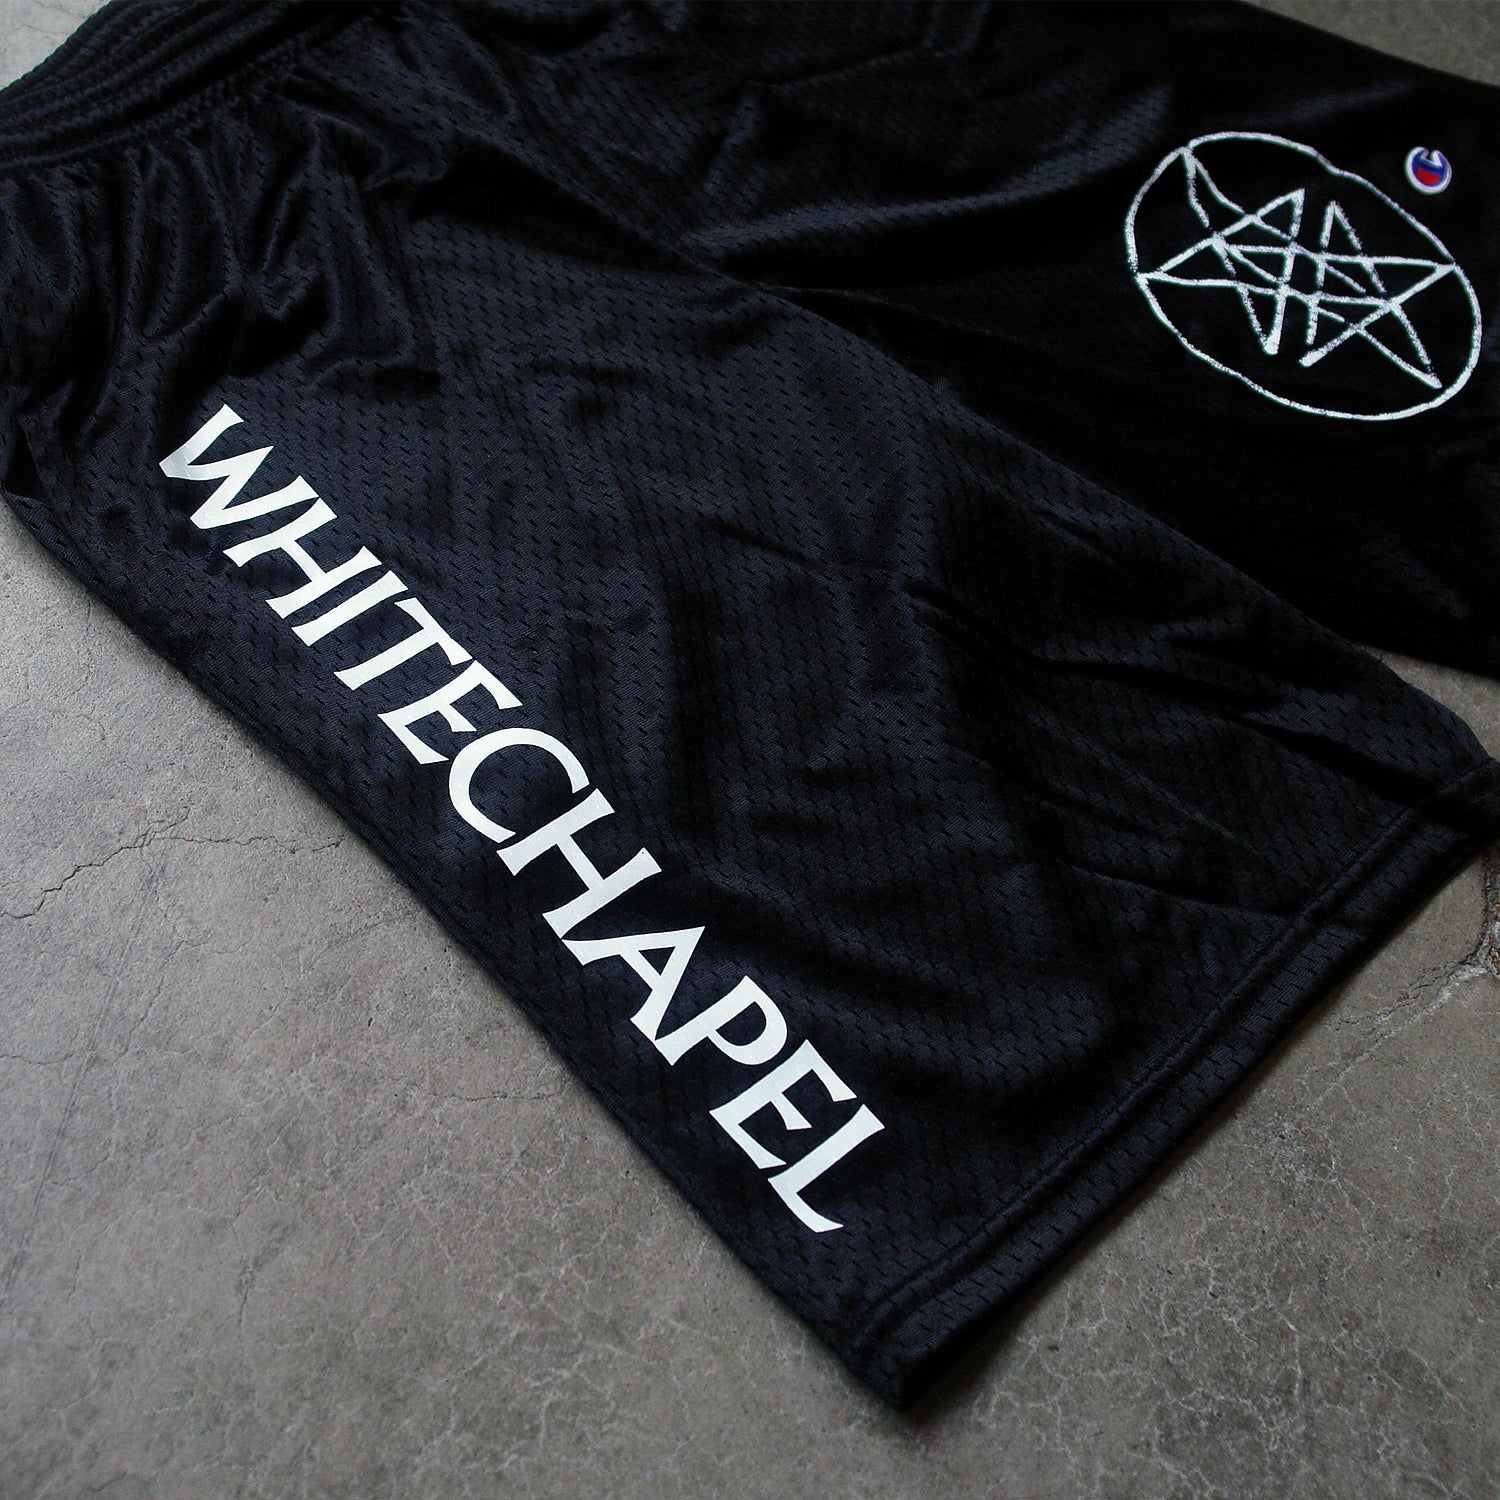 close up Image of black shorts against a grey concrete background. The shorts are athletic style with a drawstring. Descending down the right leg in white text says "whitechapel". The bottom of the left leg features a double pentagram- a white circle with two stars that are mirroring and overlapping each other in the center of it. The champion "C" red white and blue logo is next to this. 